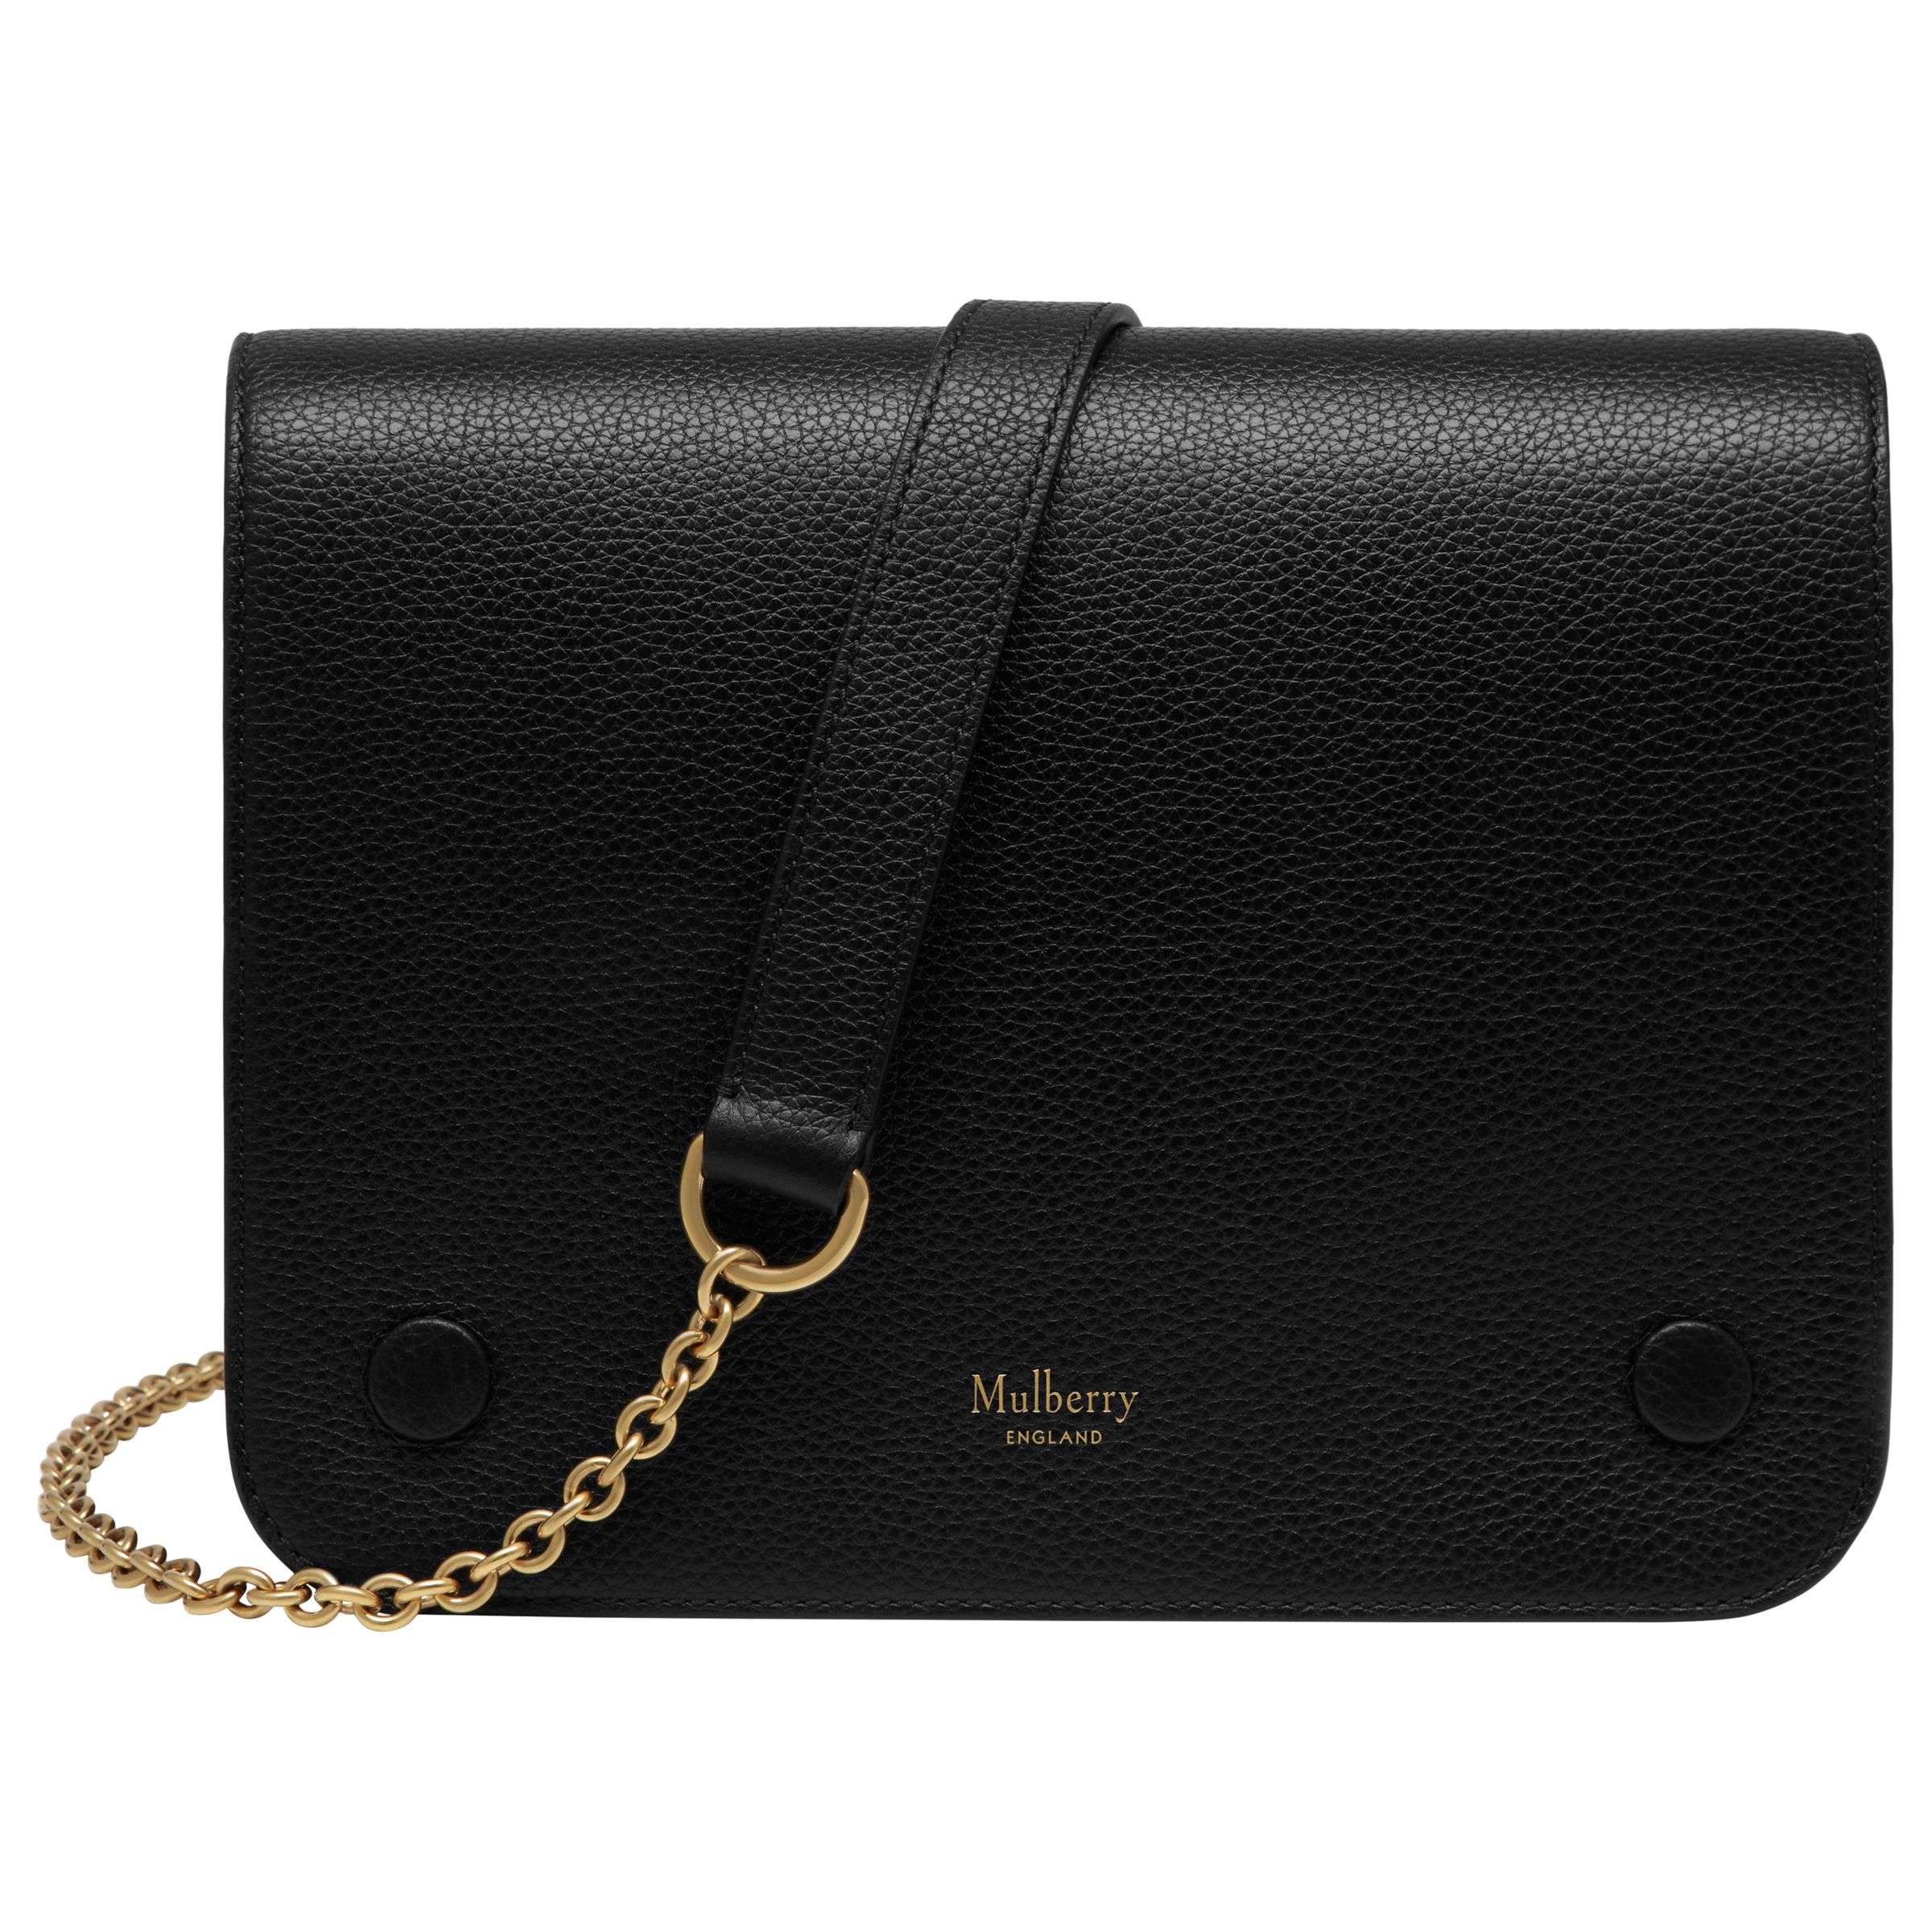 Mulberry Clifton Classic Grain Leather Across Body Bag, Black